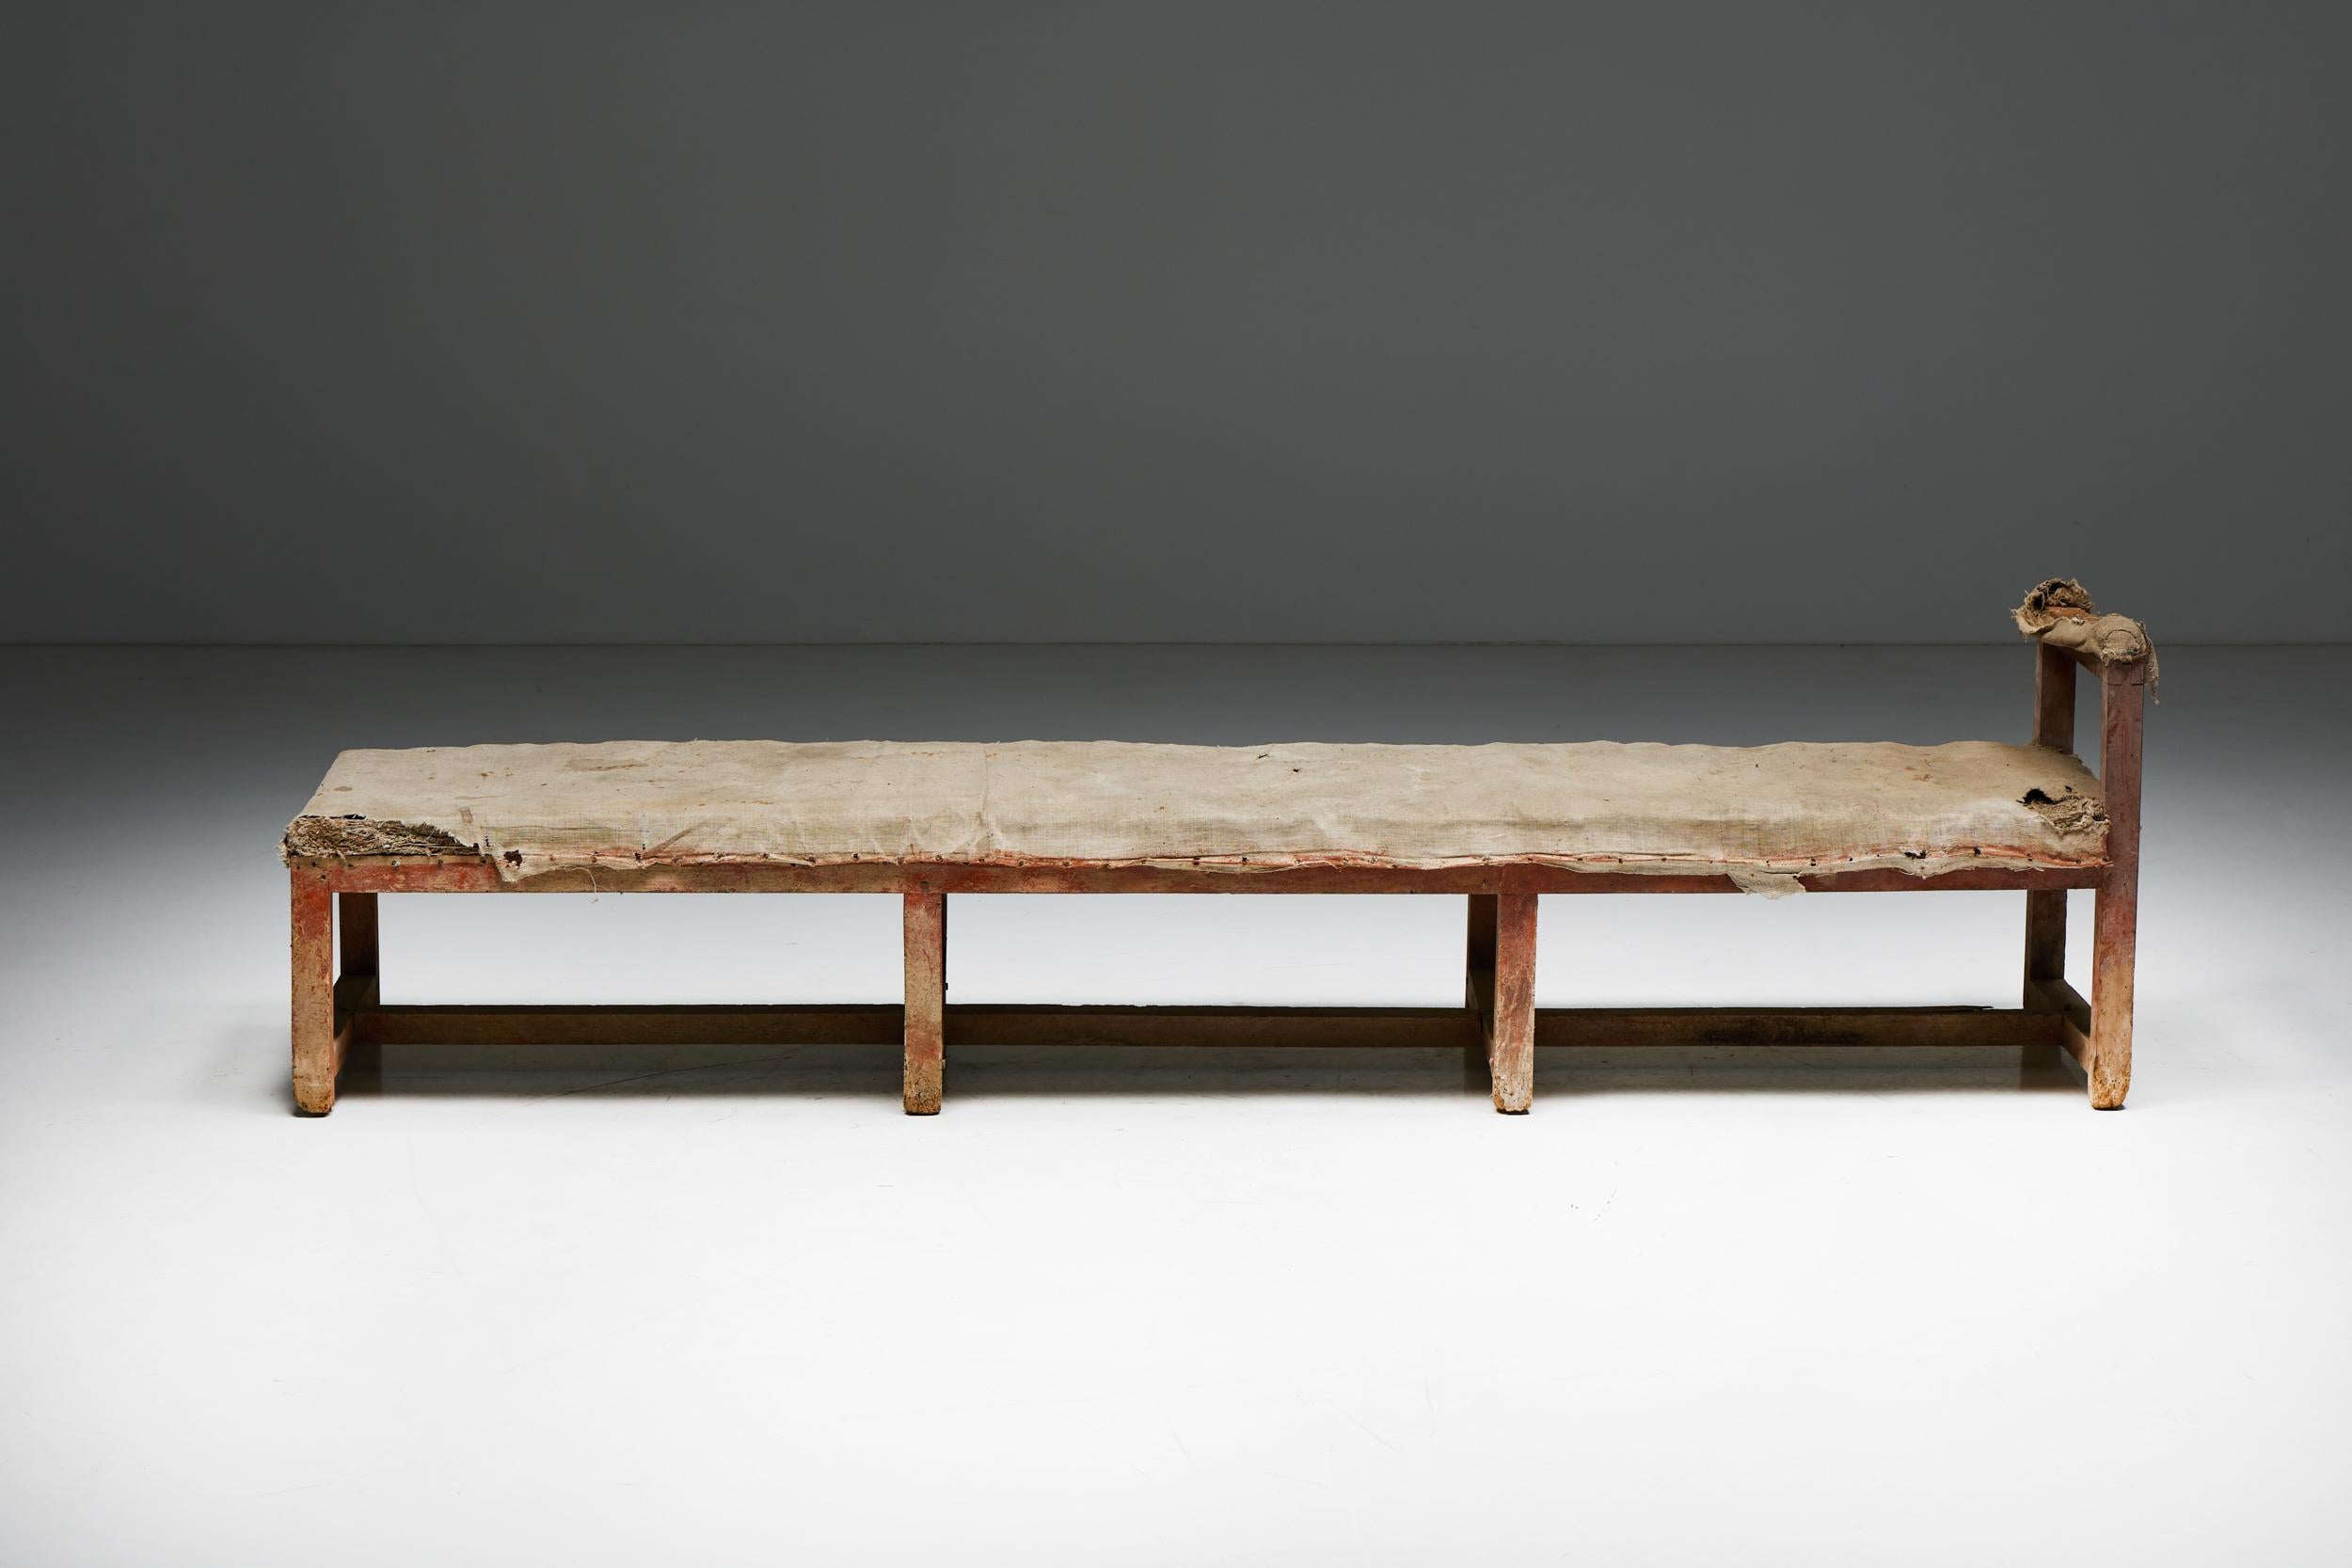 Pair of Rustic Travail Populaire Benches, France, 19th Century For Sale 10